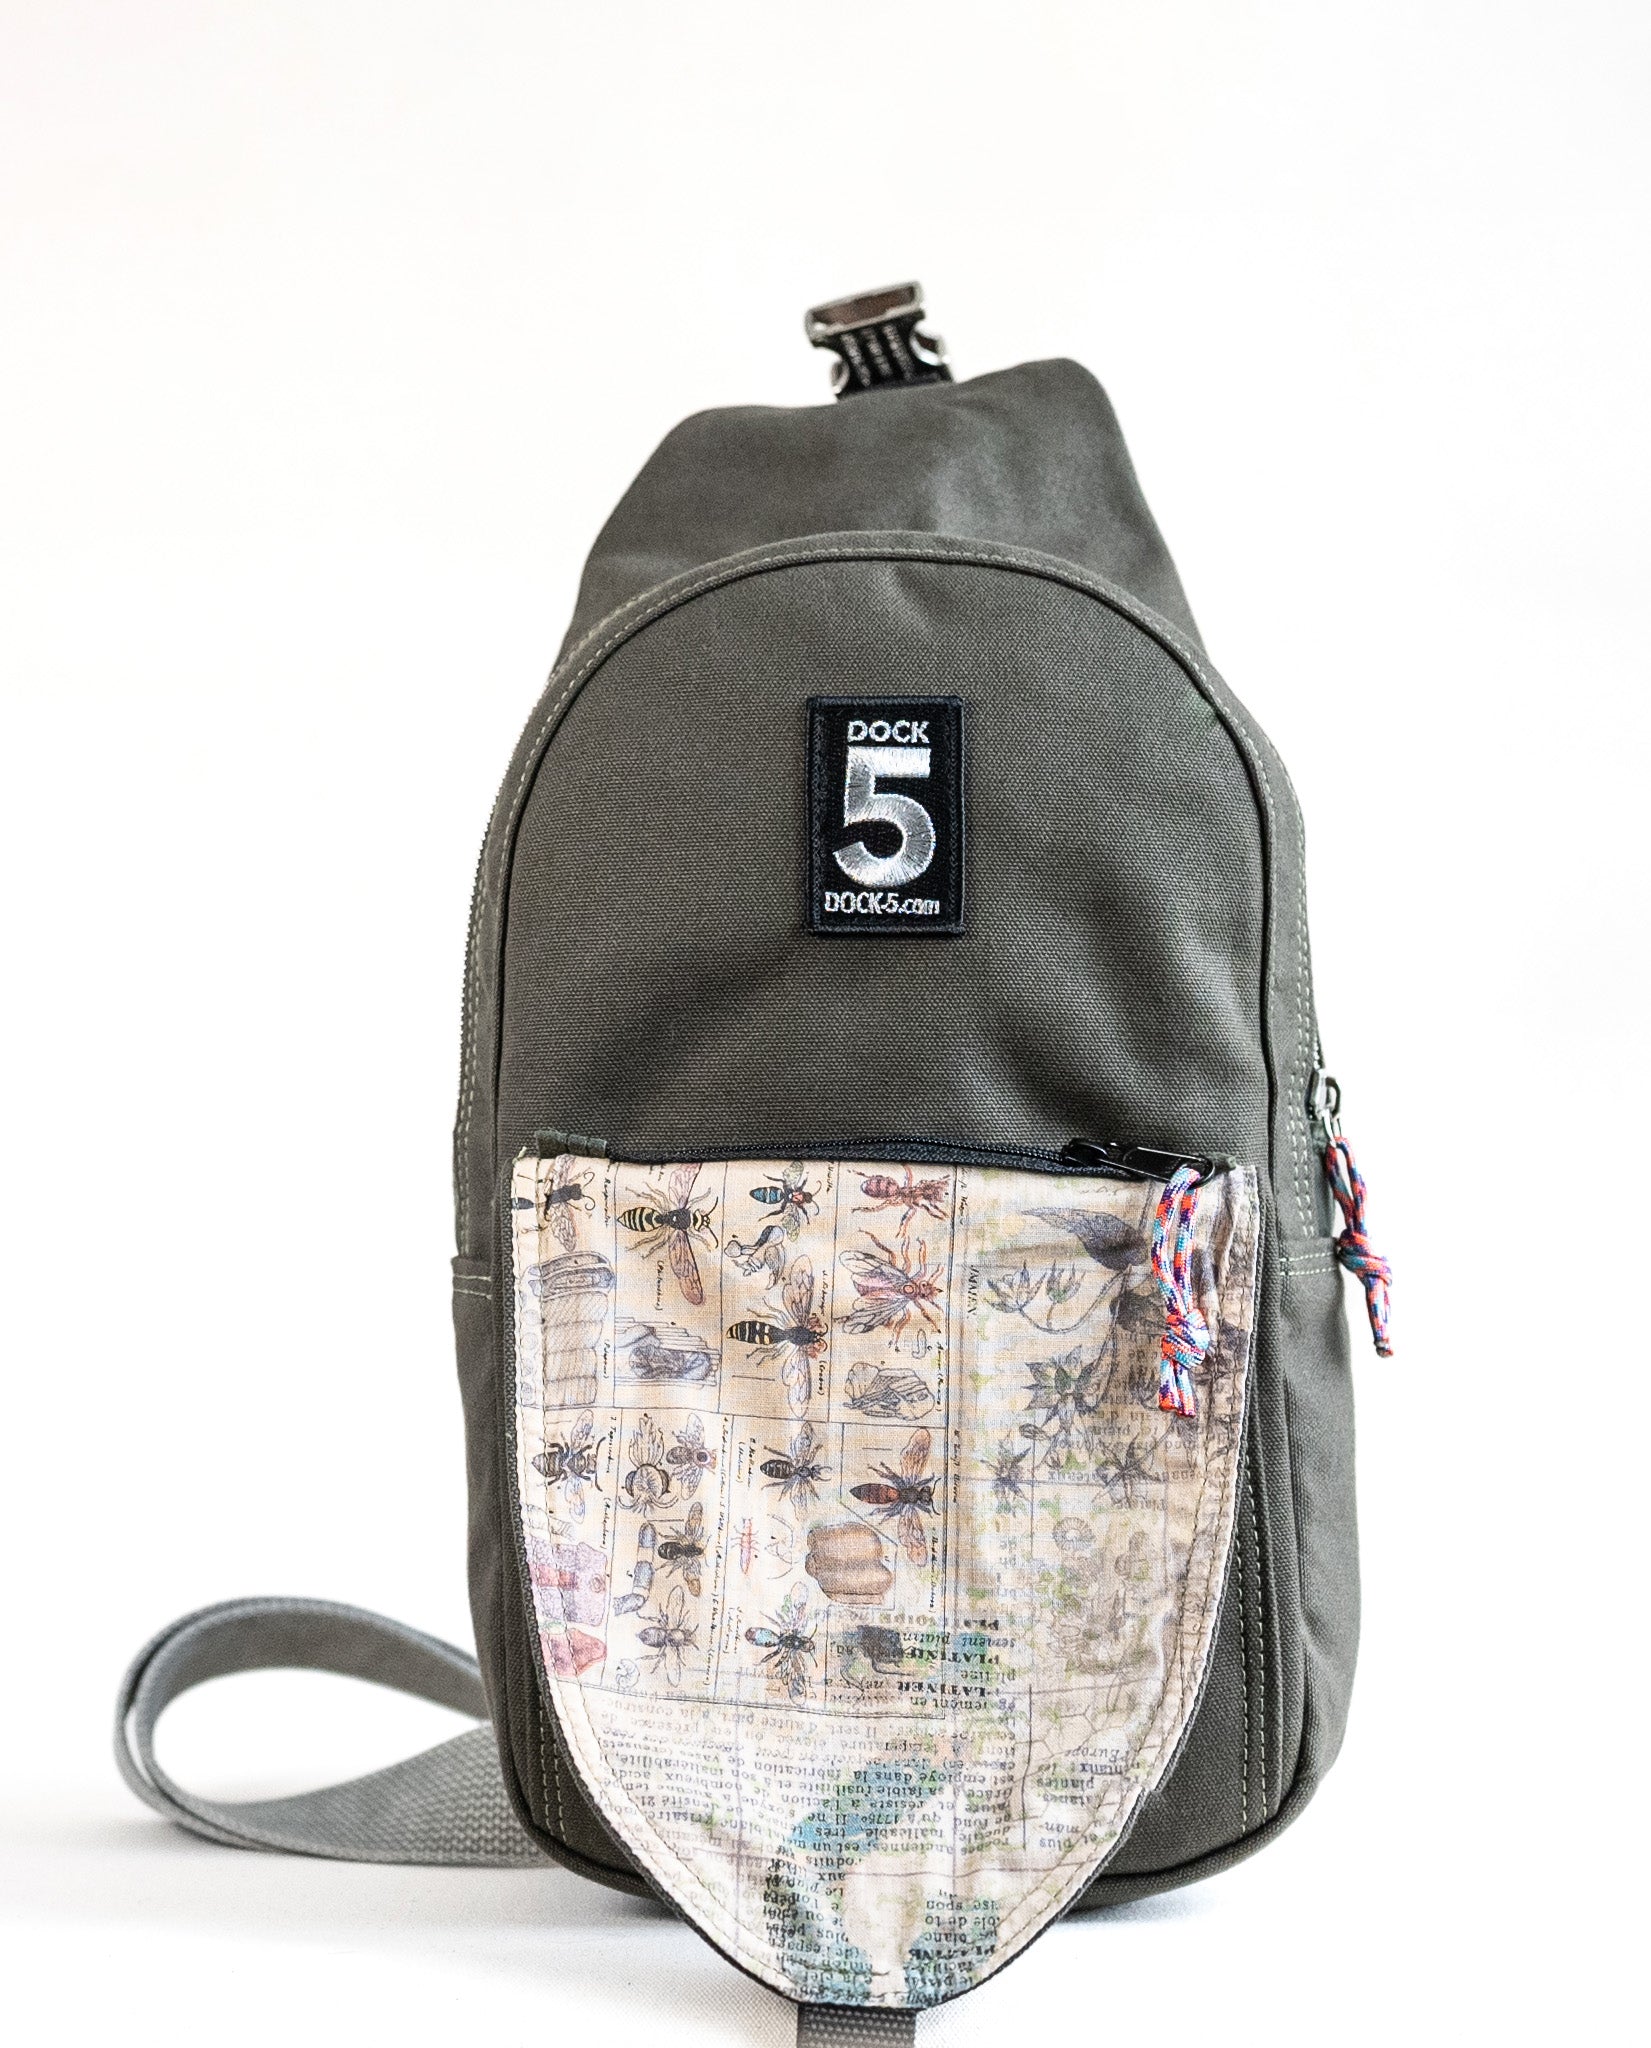 Dock 5’s hand-sewn Kingfisher Canvas Sling Bag is lined with a entomology print fabric